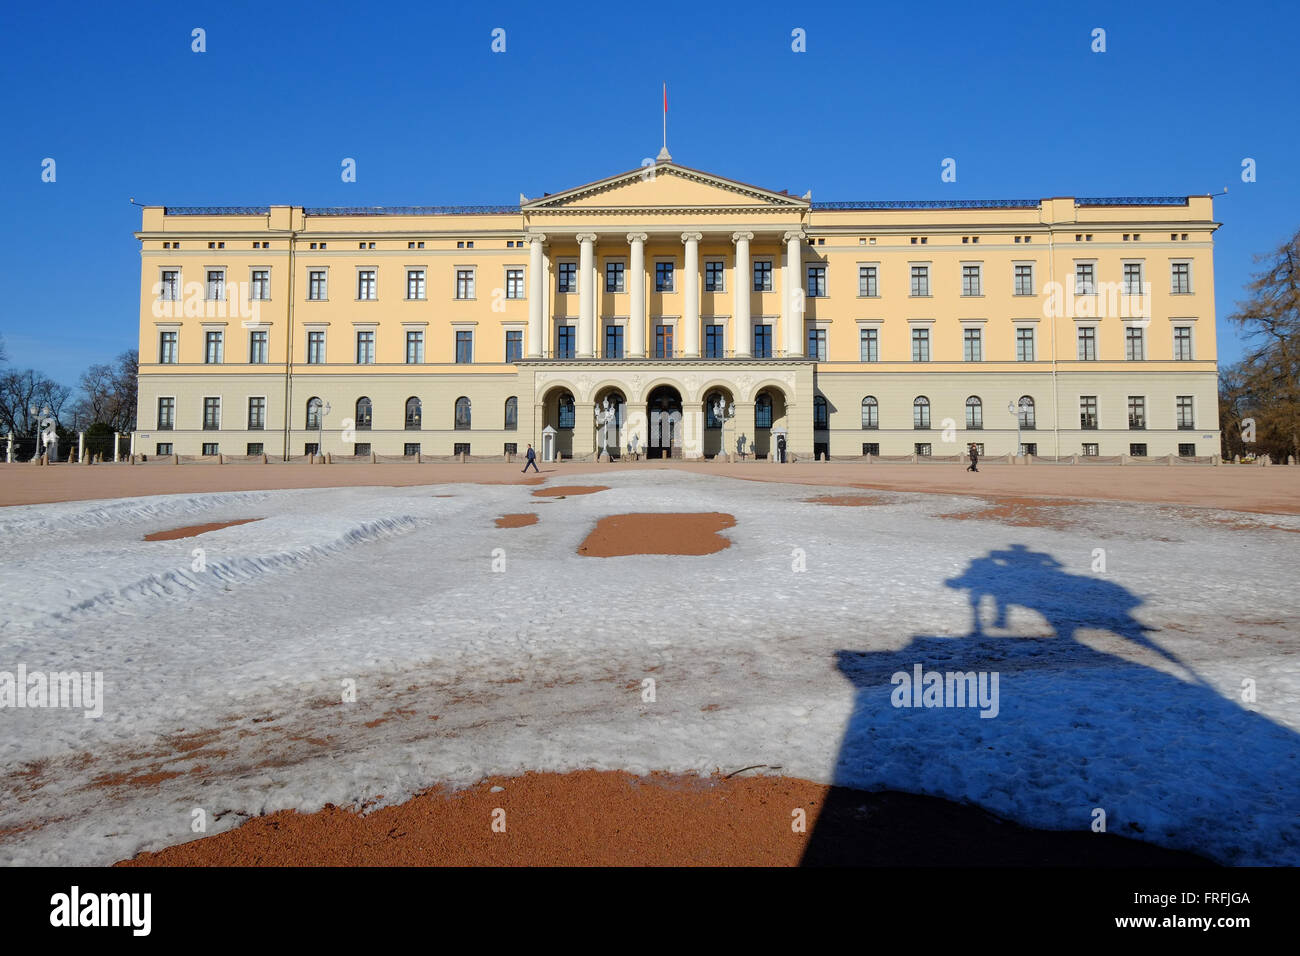 The Royal Palace in Oslo, Norway Stock Photo